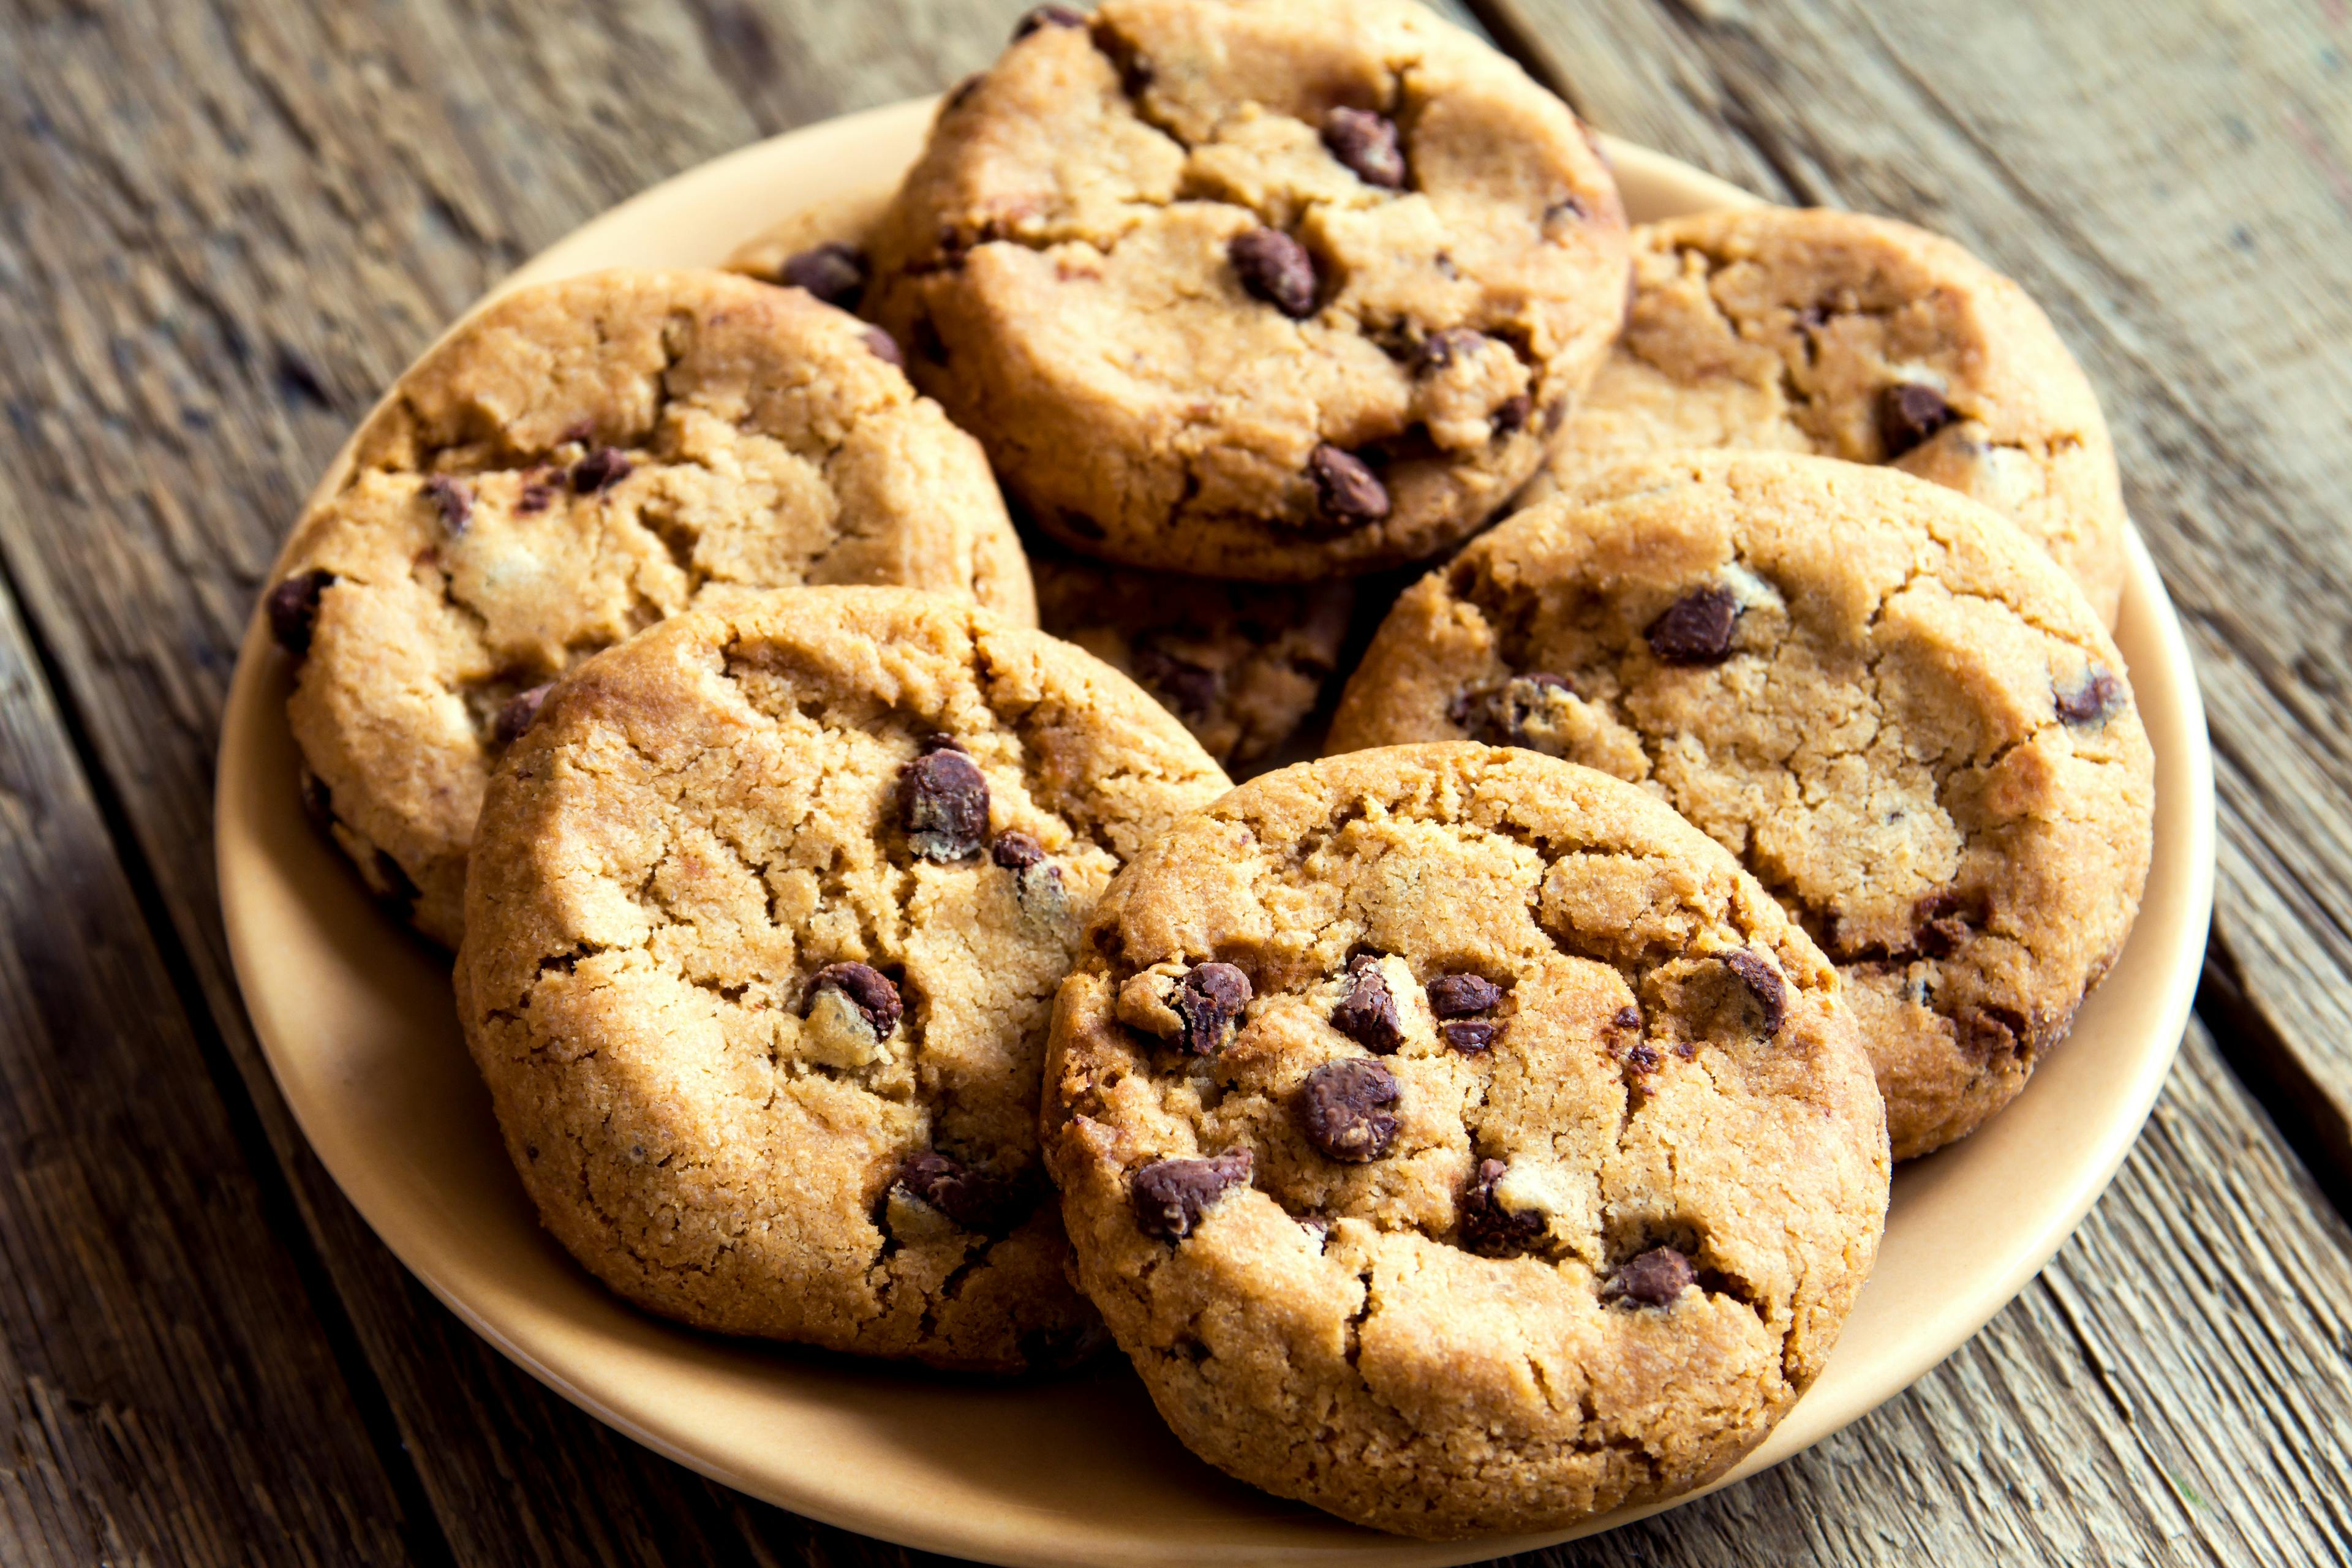 Millie's-style Classic Chocolate Chip Cookies